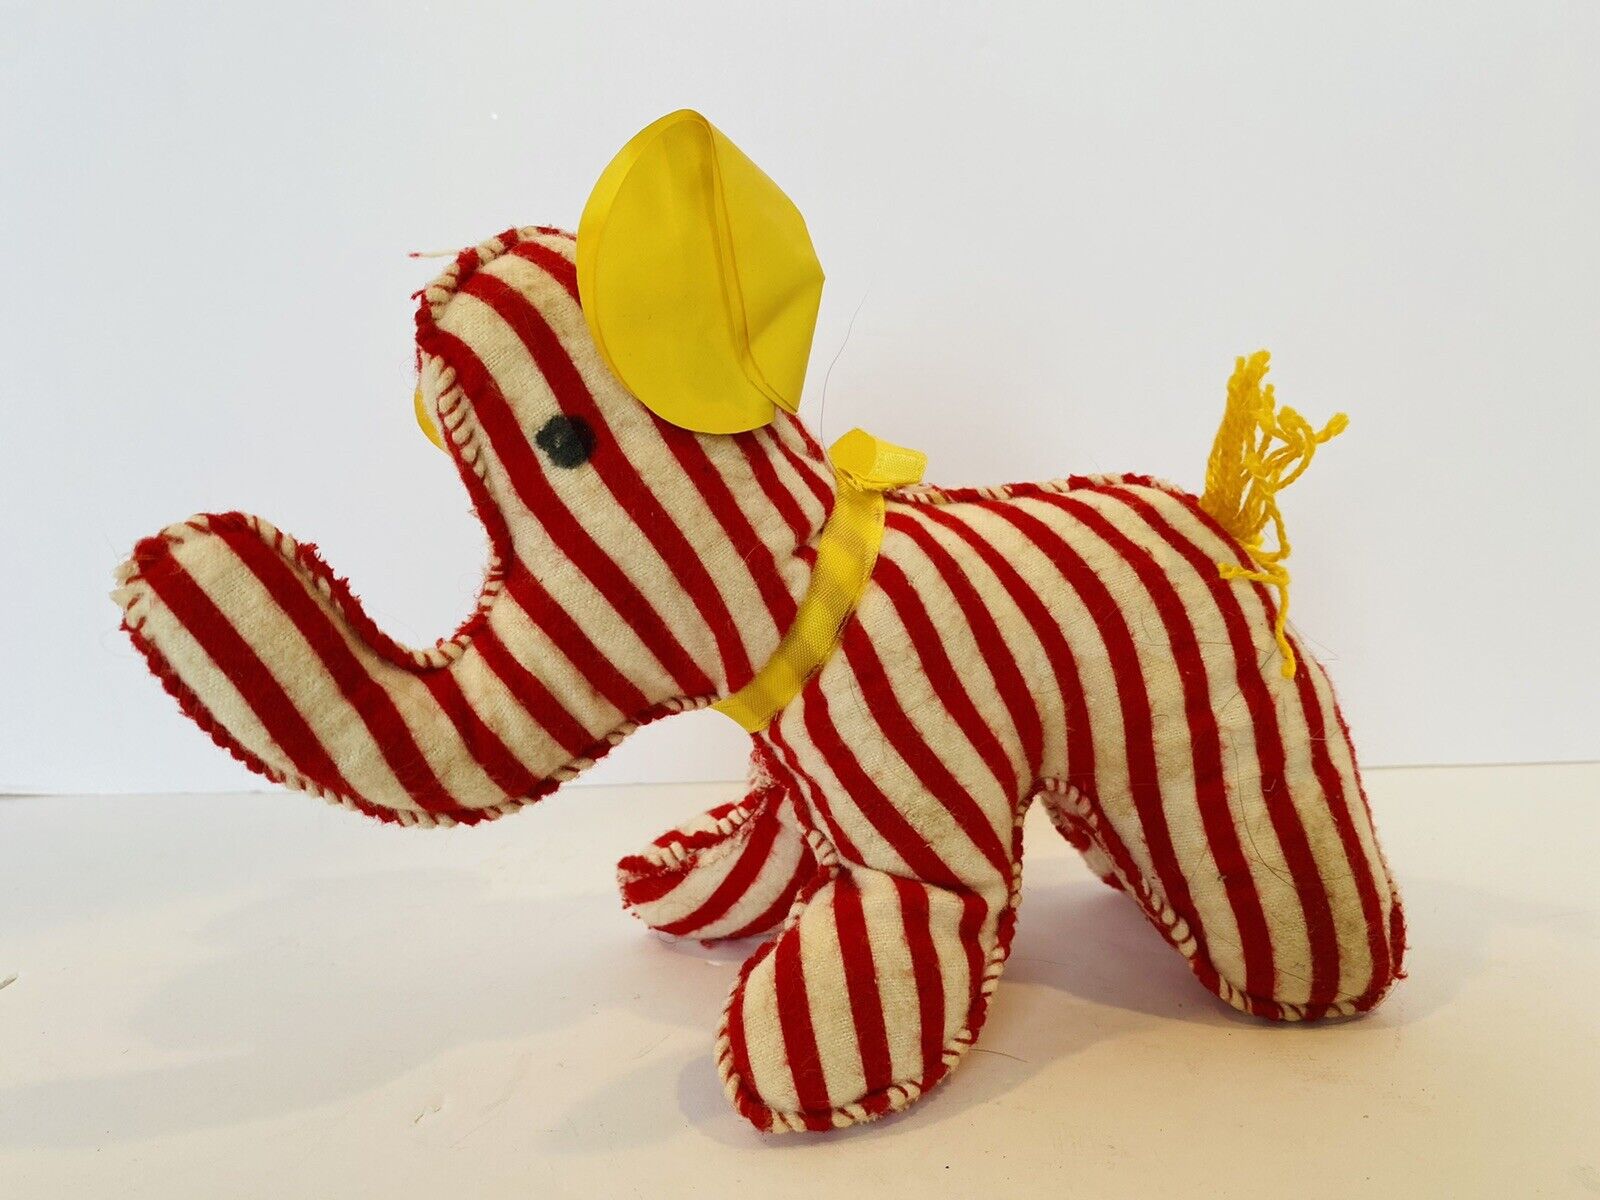 Vintage Handmade Ranking shipfree TOP12 Plush Elephant Toy And White Flanne Red Striped